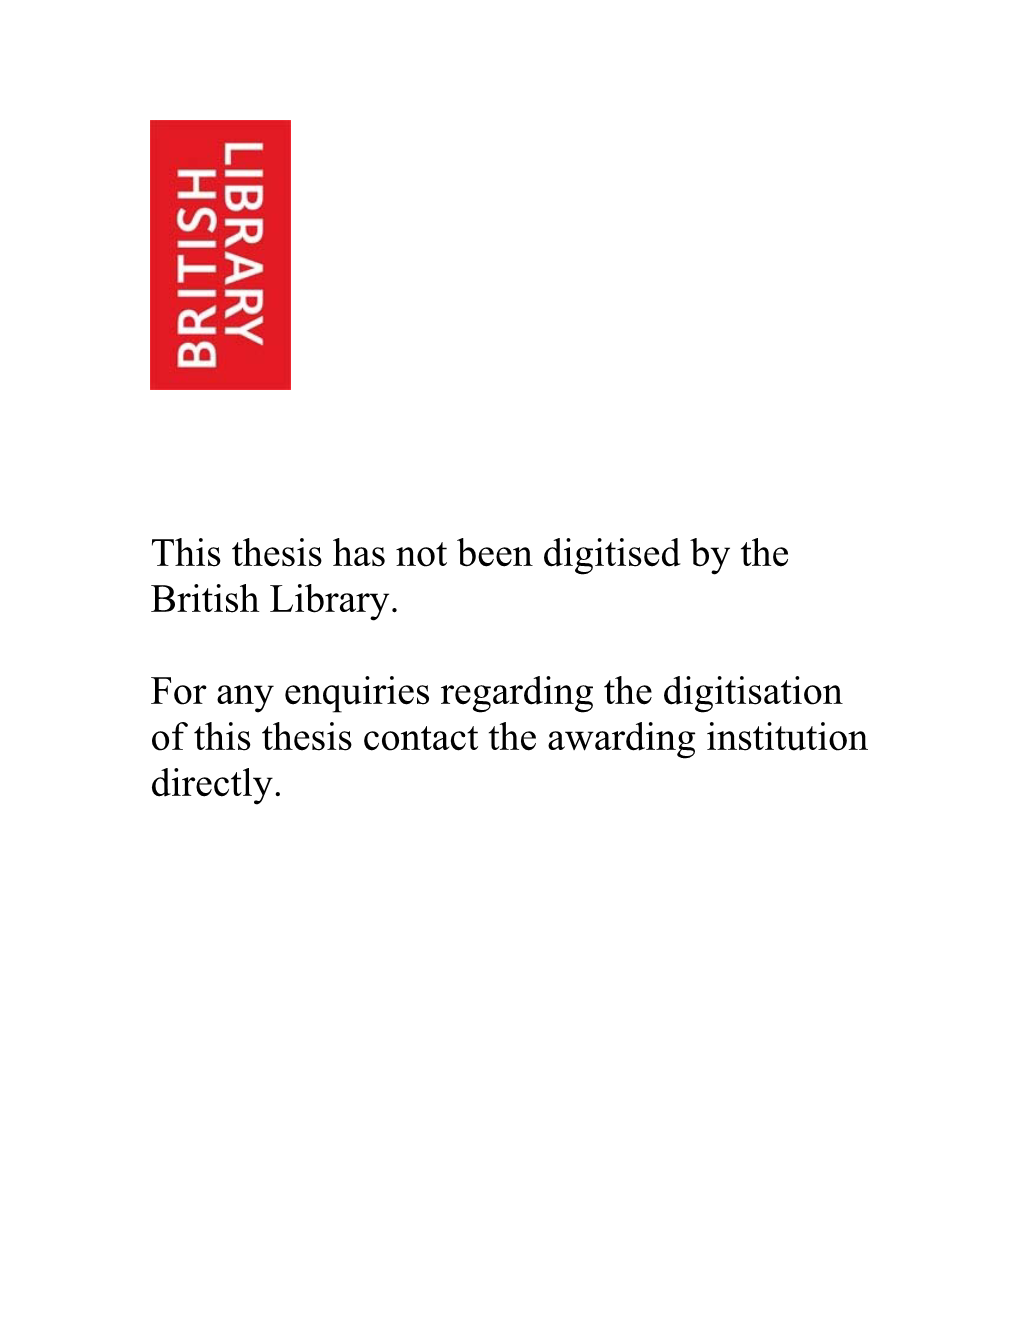 This Thesis Has Not Been Digitised by the British Library. for Any